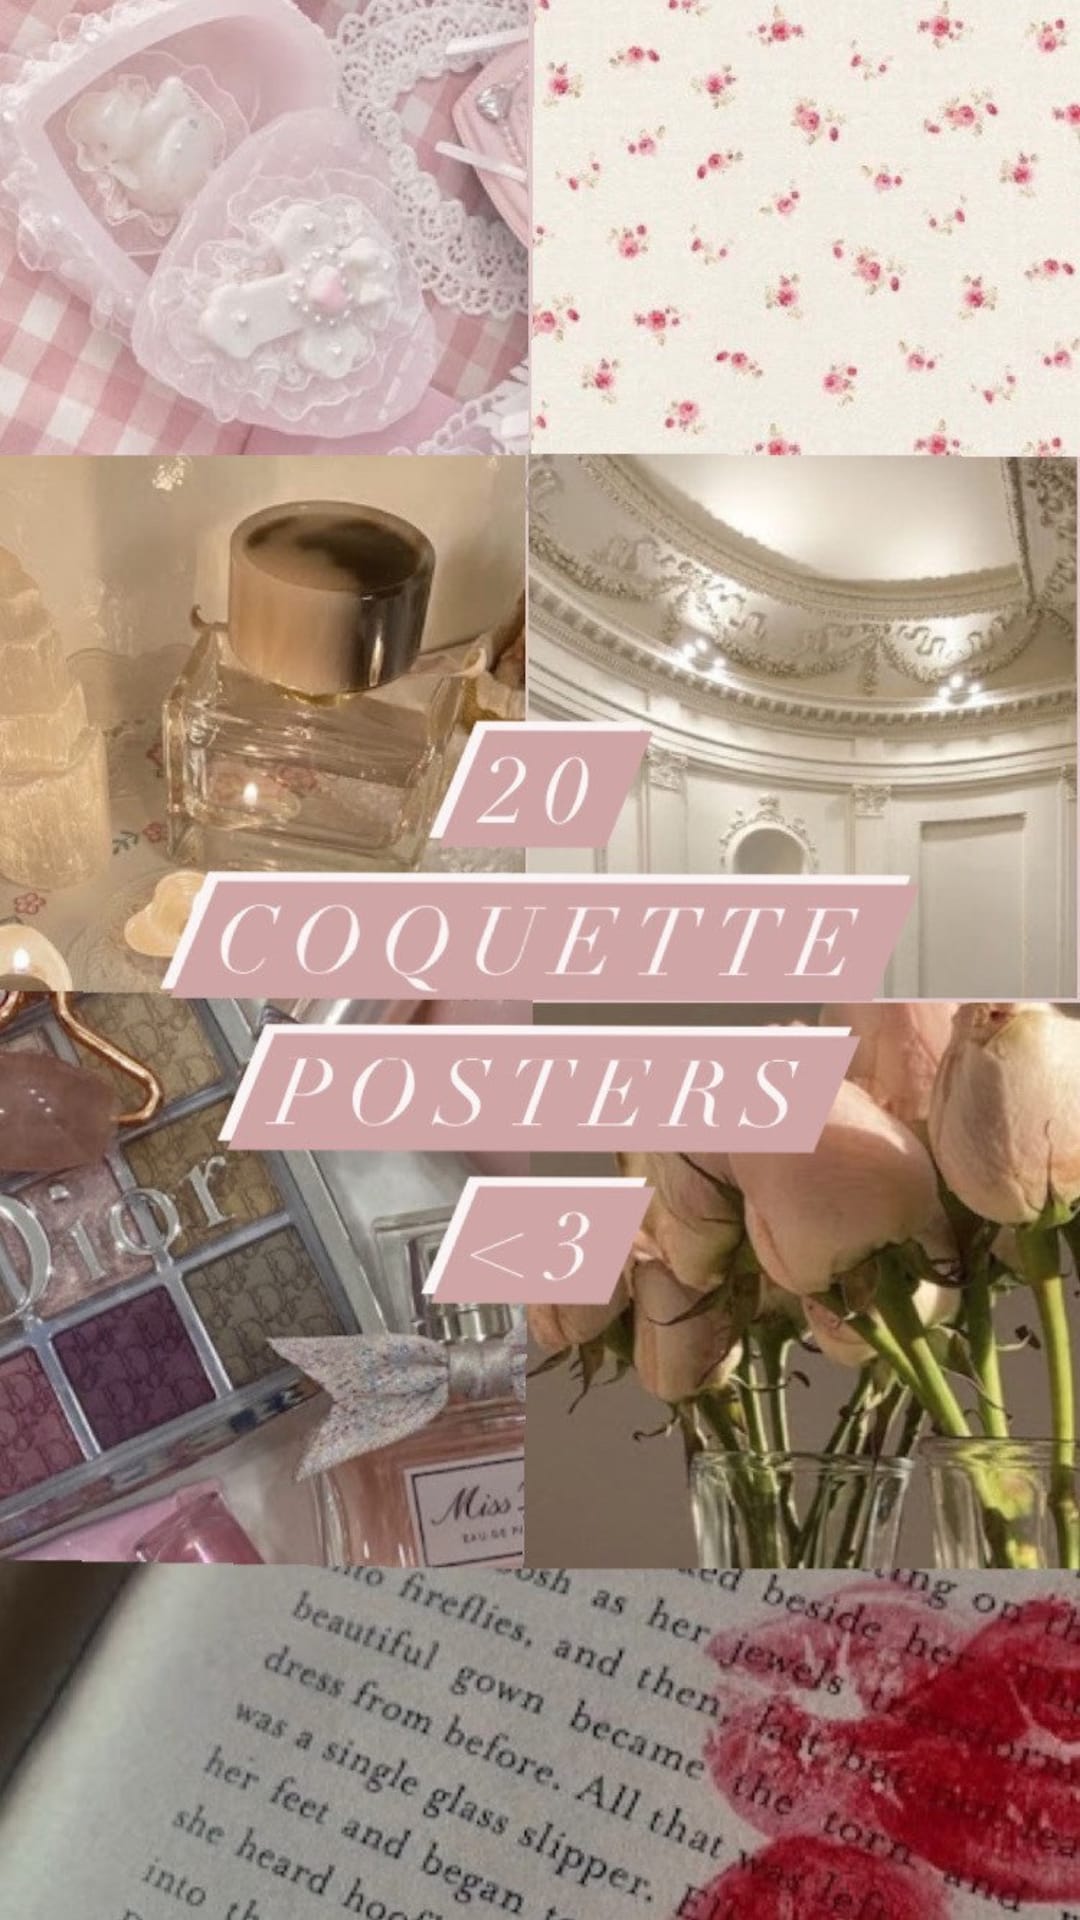 The Coquette Aesthetic and the Love of Vintage - EnigmaMuse